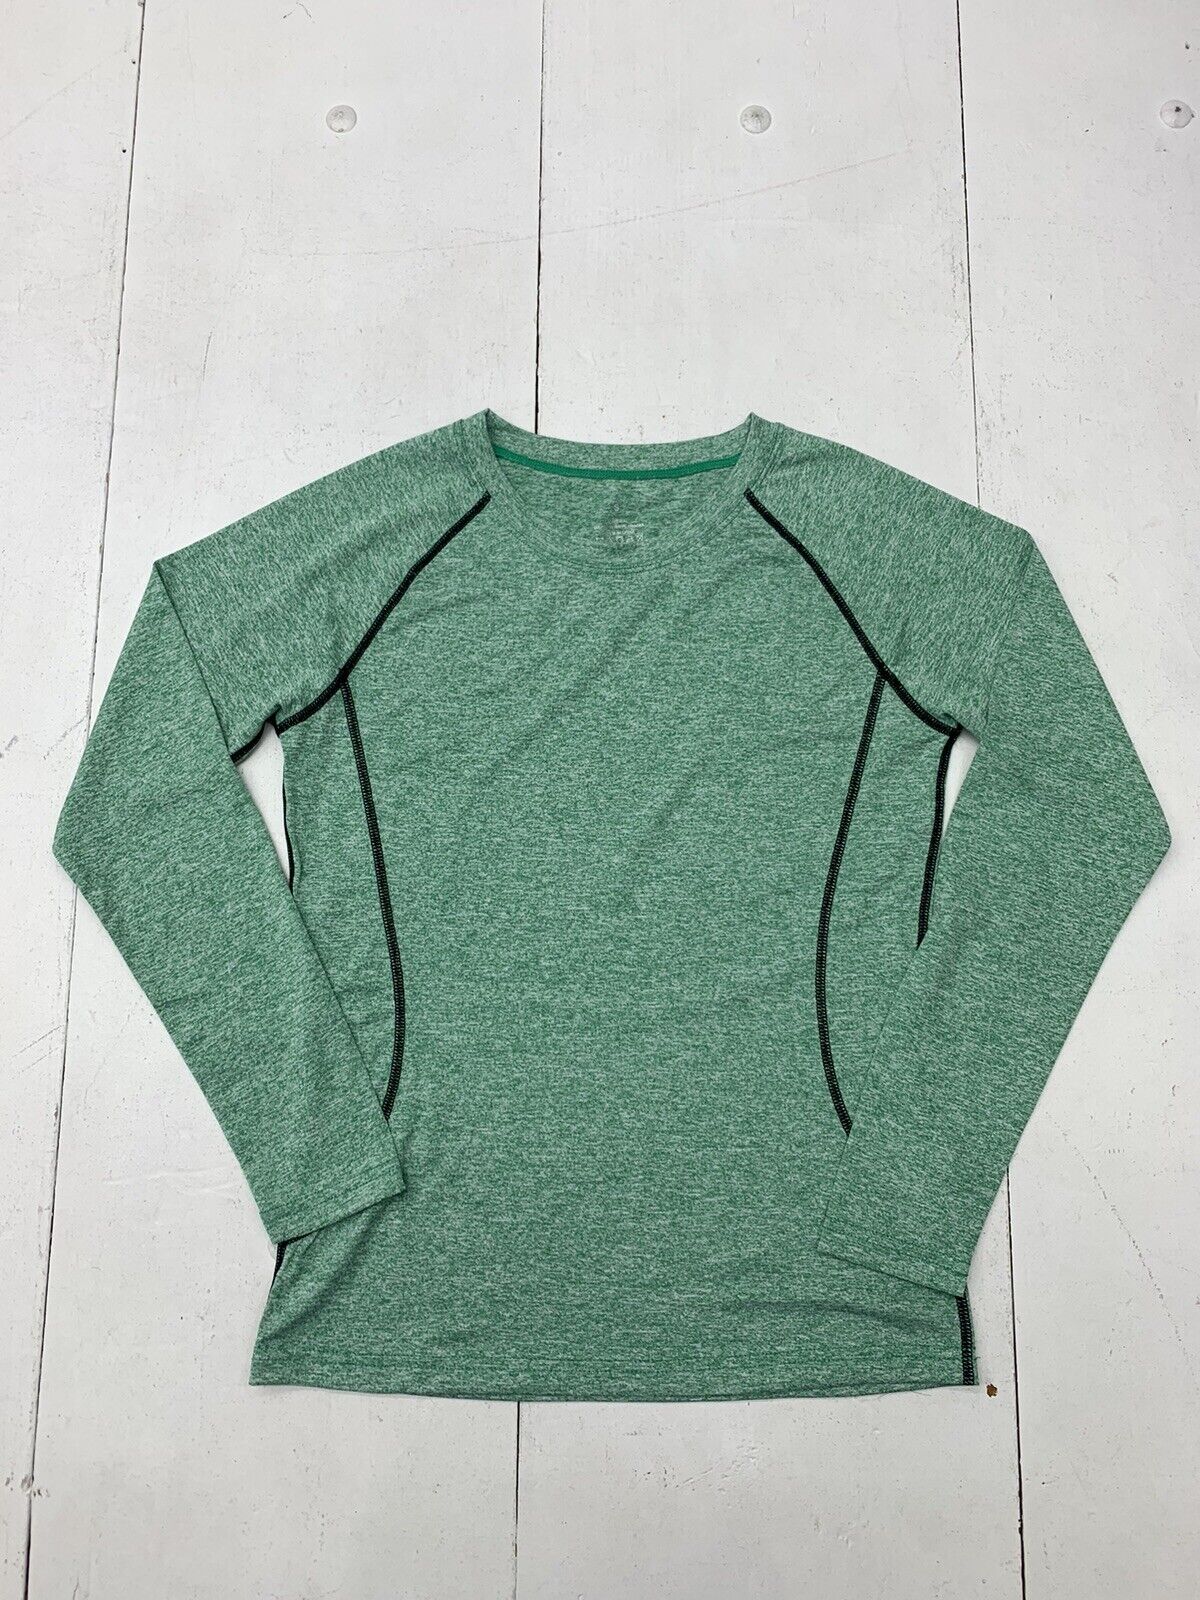 Unbranded Womens Green Athletic Long Sleeve Shirt Size Small